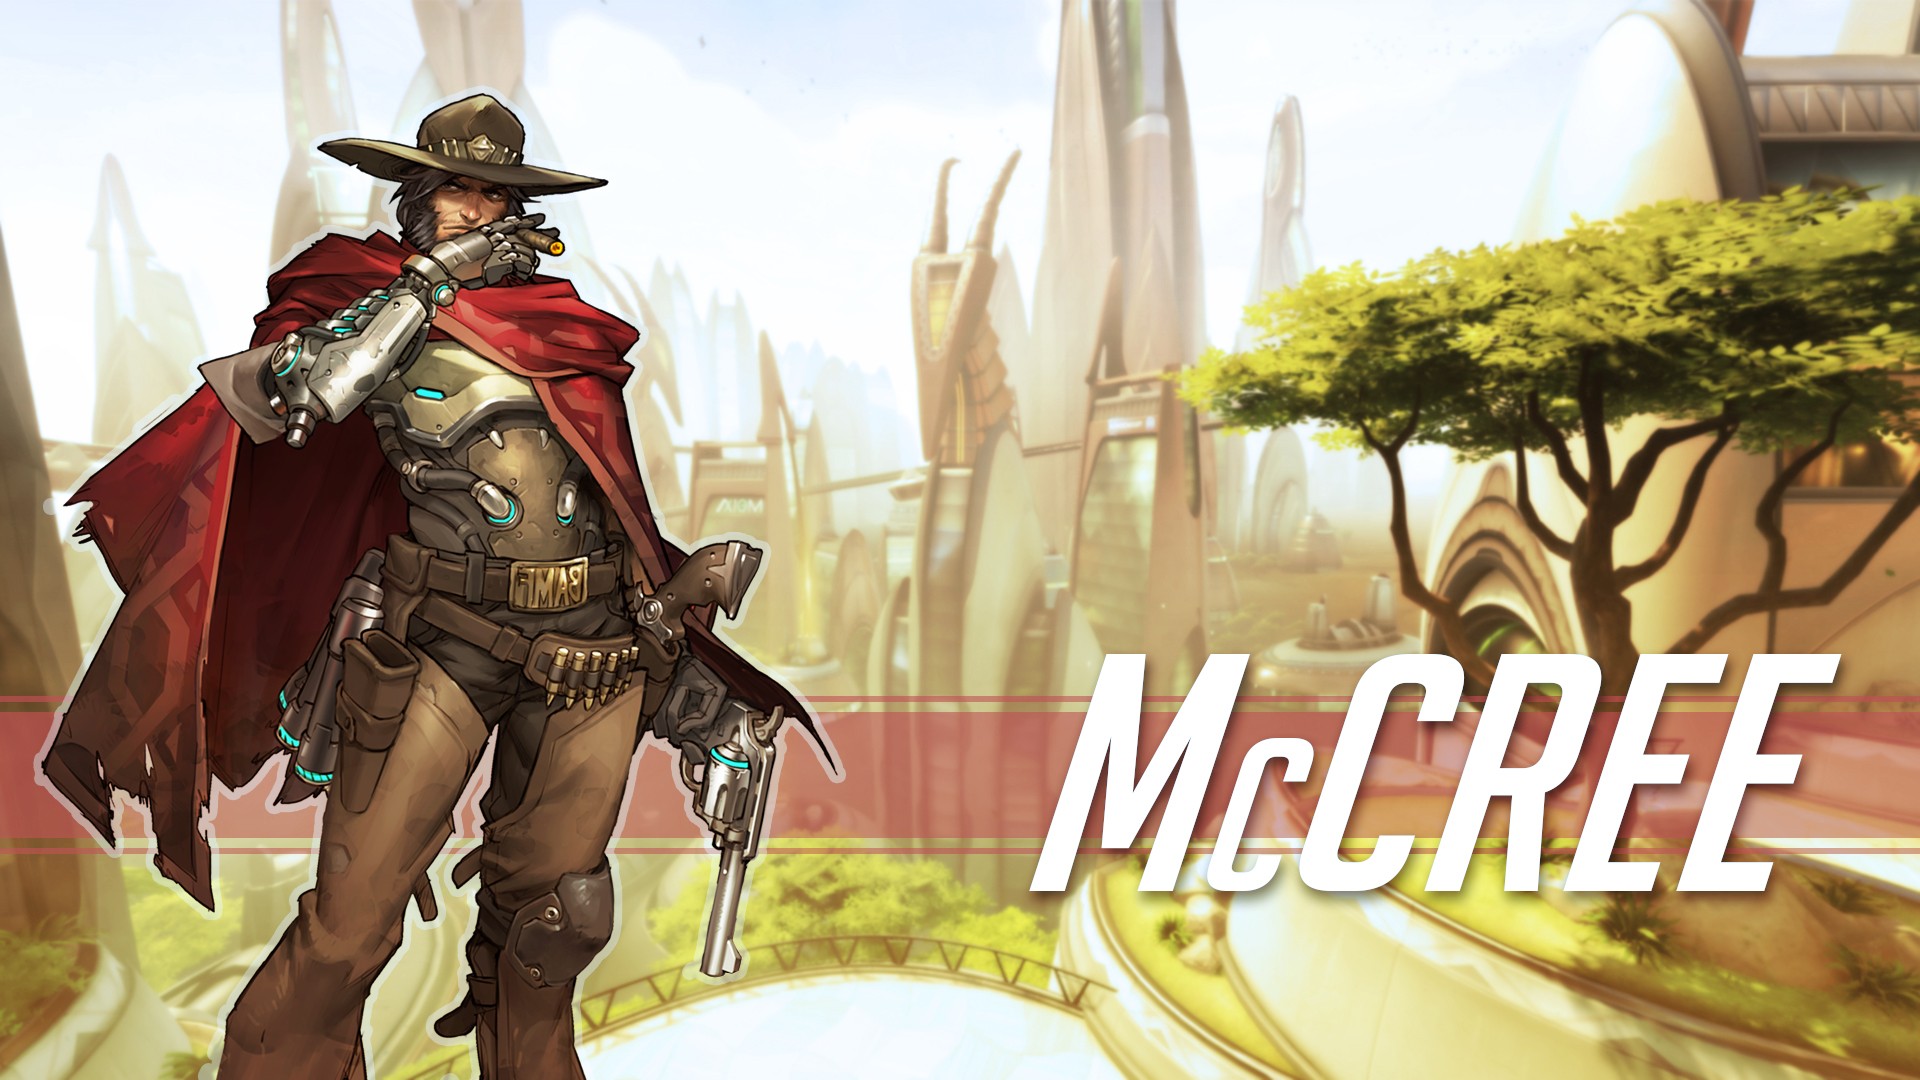 livewirehd (Author), McCree, Jesse McCree, Blizzard Entertainment, Overwatch, Video Games Wallpaper